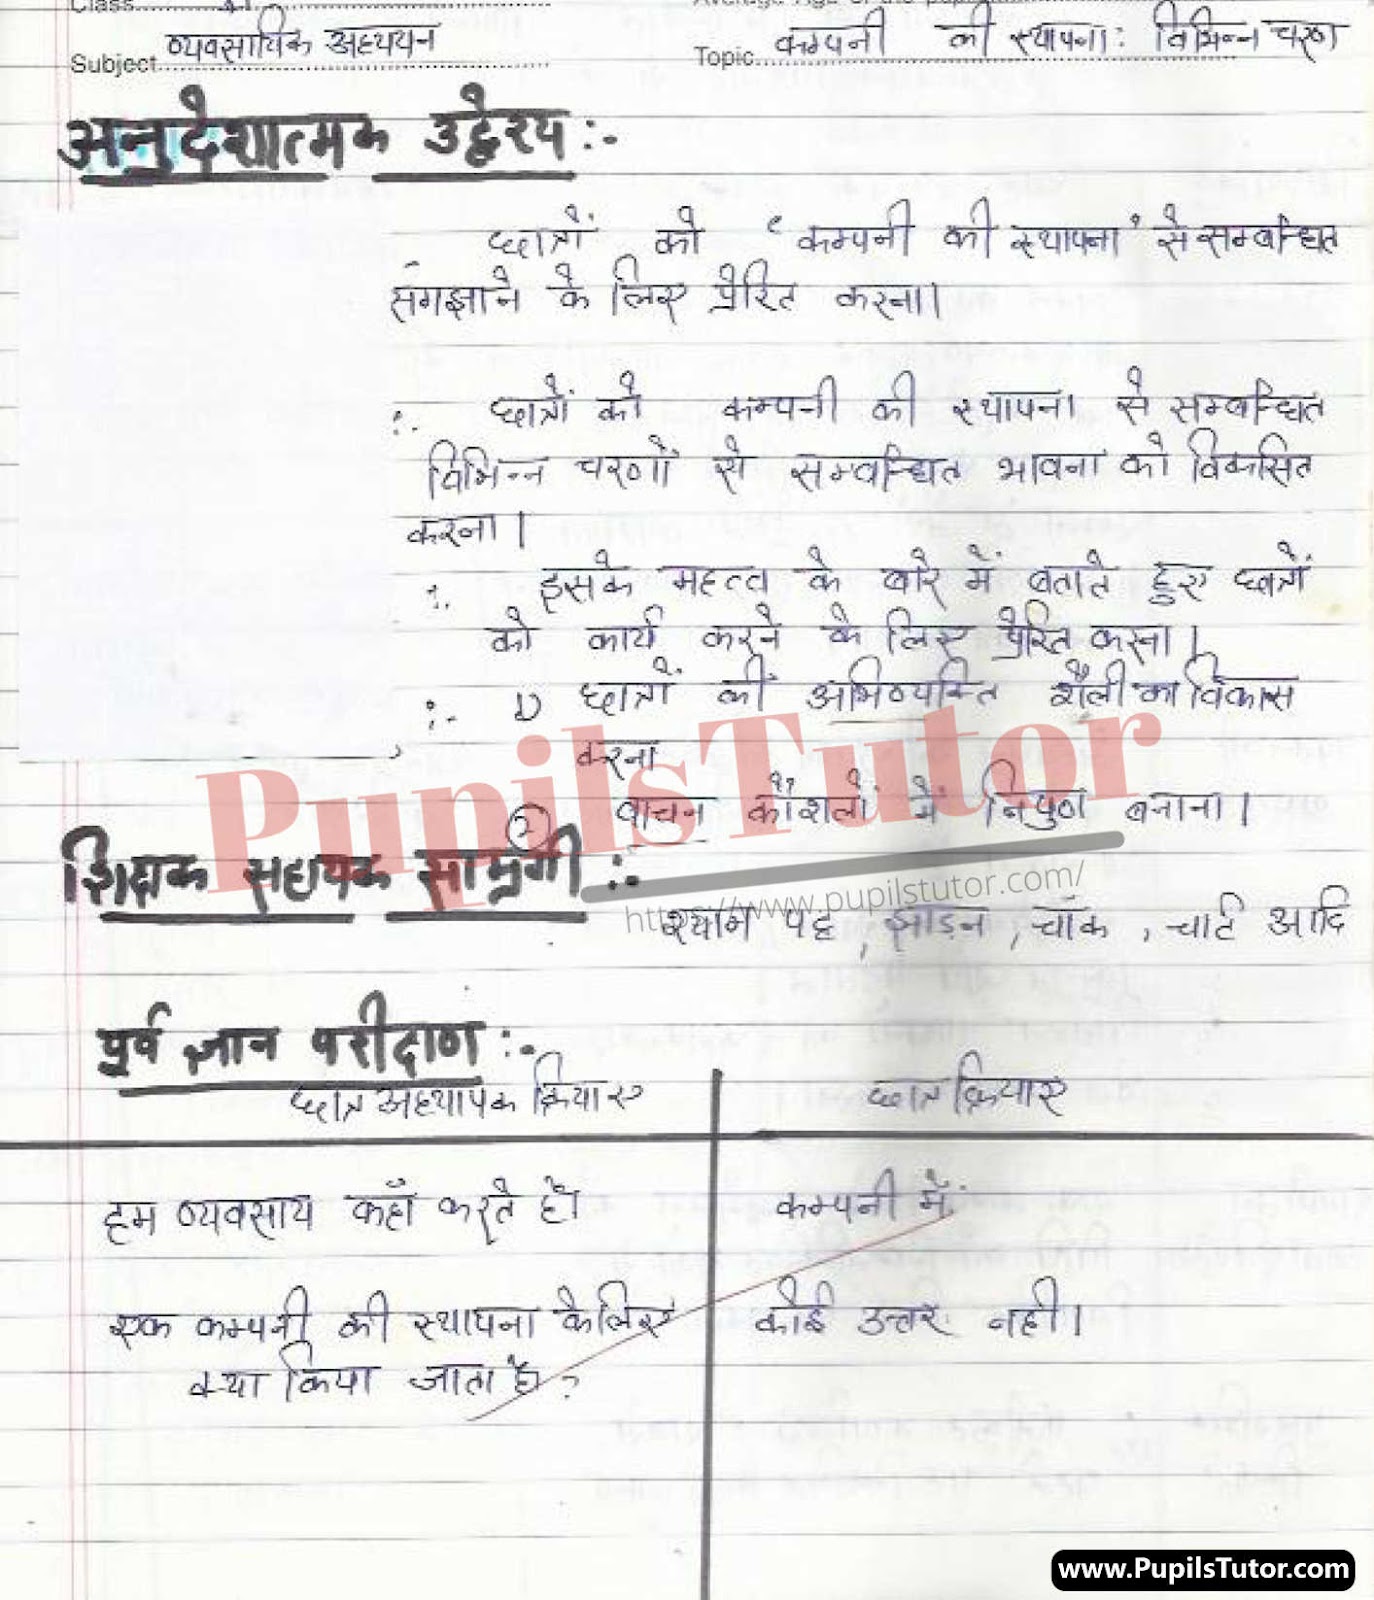 Company Ki Sthapna Ke Vibhinn Charan Lesson Plan | Various Stages Of Setting Up The Company  Lesson Plan In Hindi For Class 11 – (Page And Image Number 1) – Pupils Tutor